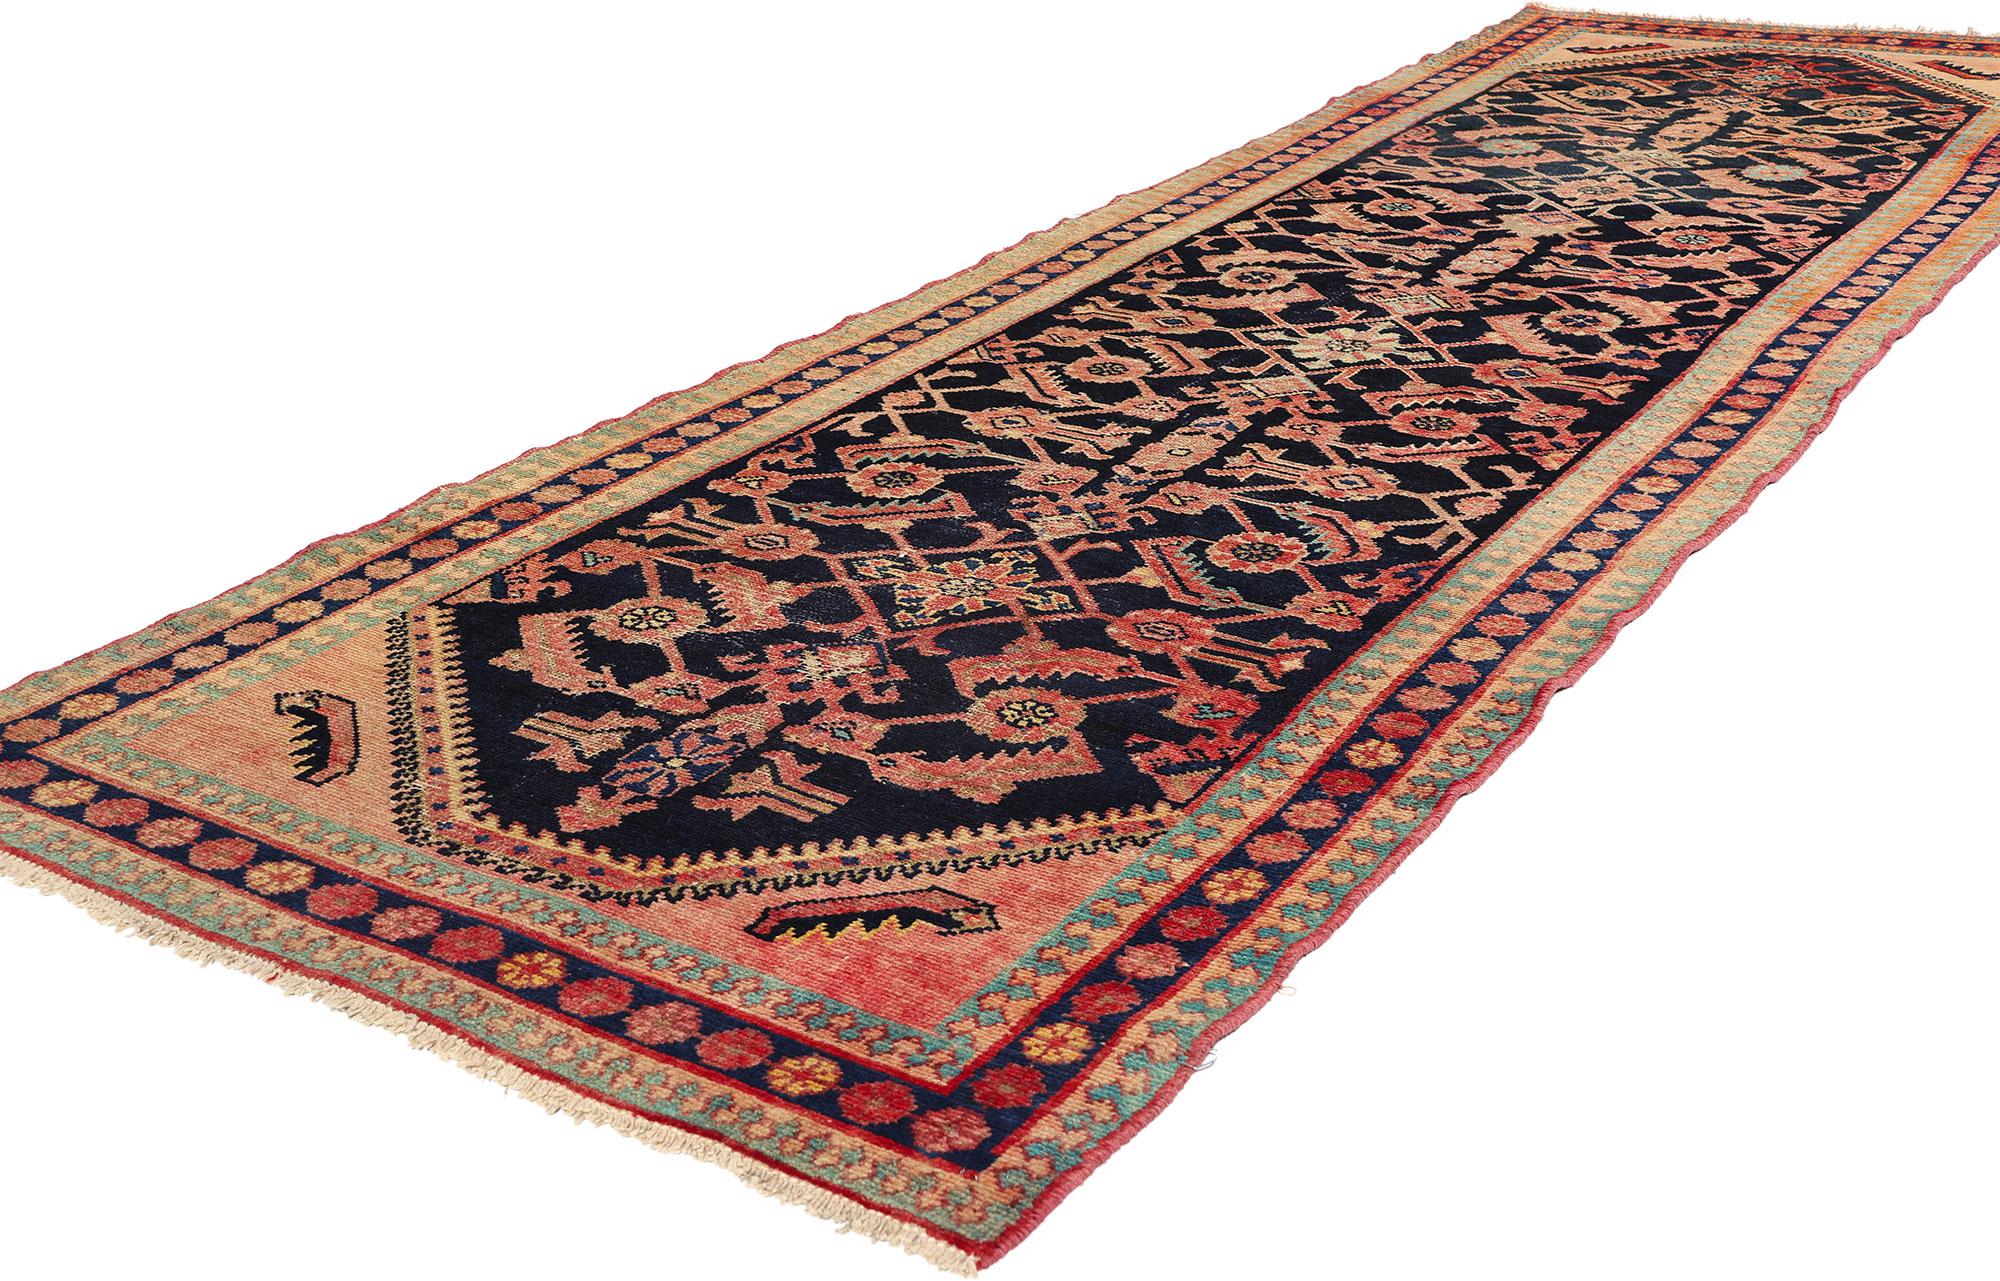 75215 Vintage Persian Malayer Rug Runner, 03'05 X 11'06. Persian Malayer carpet runners, originating from the Malayer region in western Iran, are prized for their meticulous craftsmanship and elongated dimensions, perfect for enhancing narrow spaces